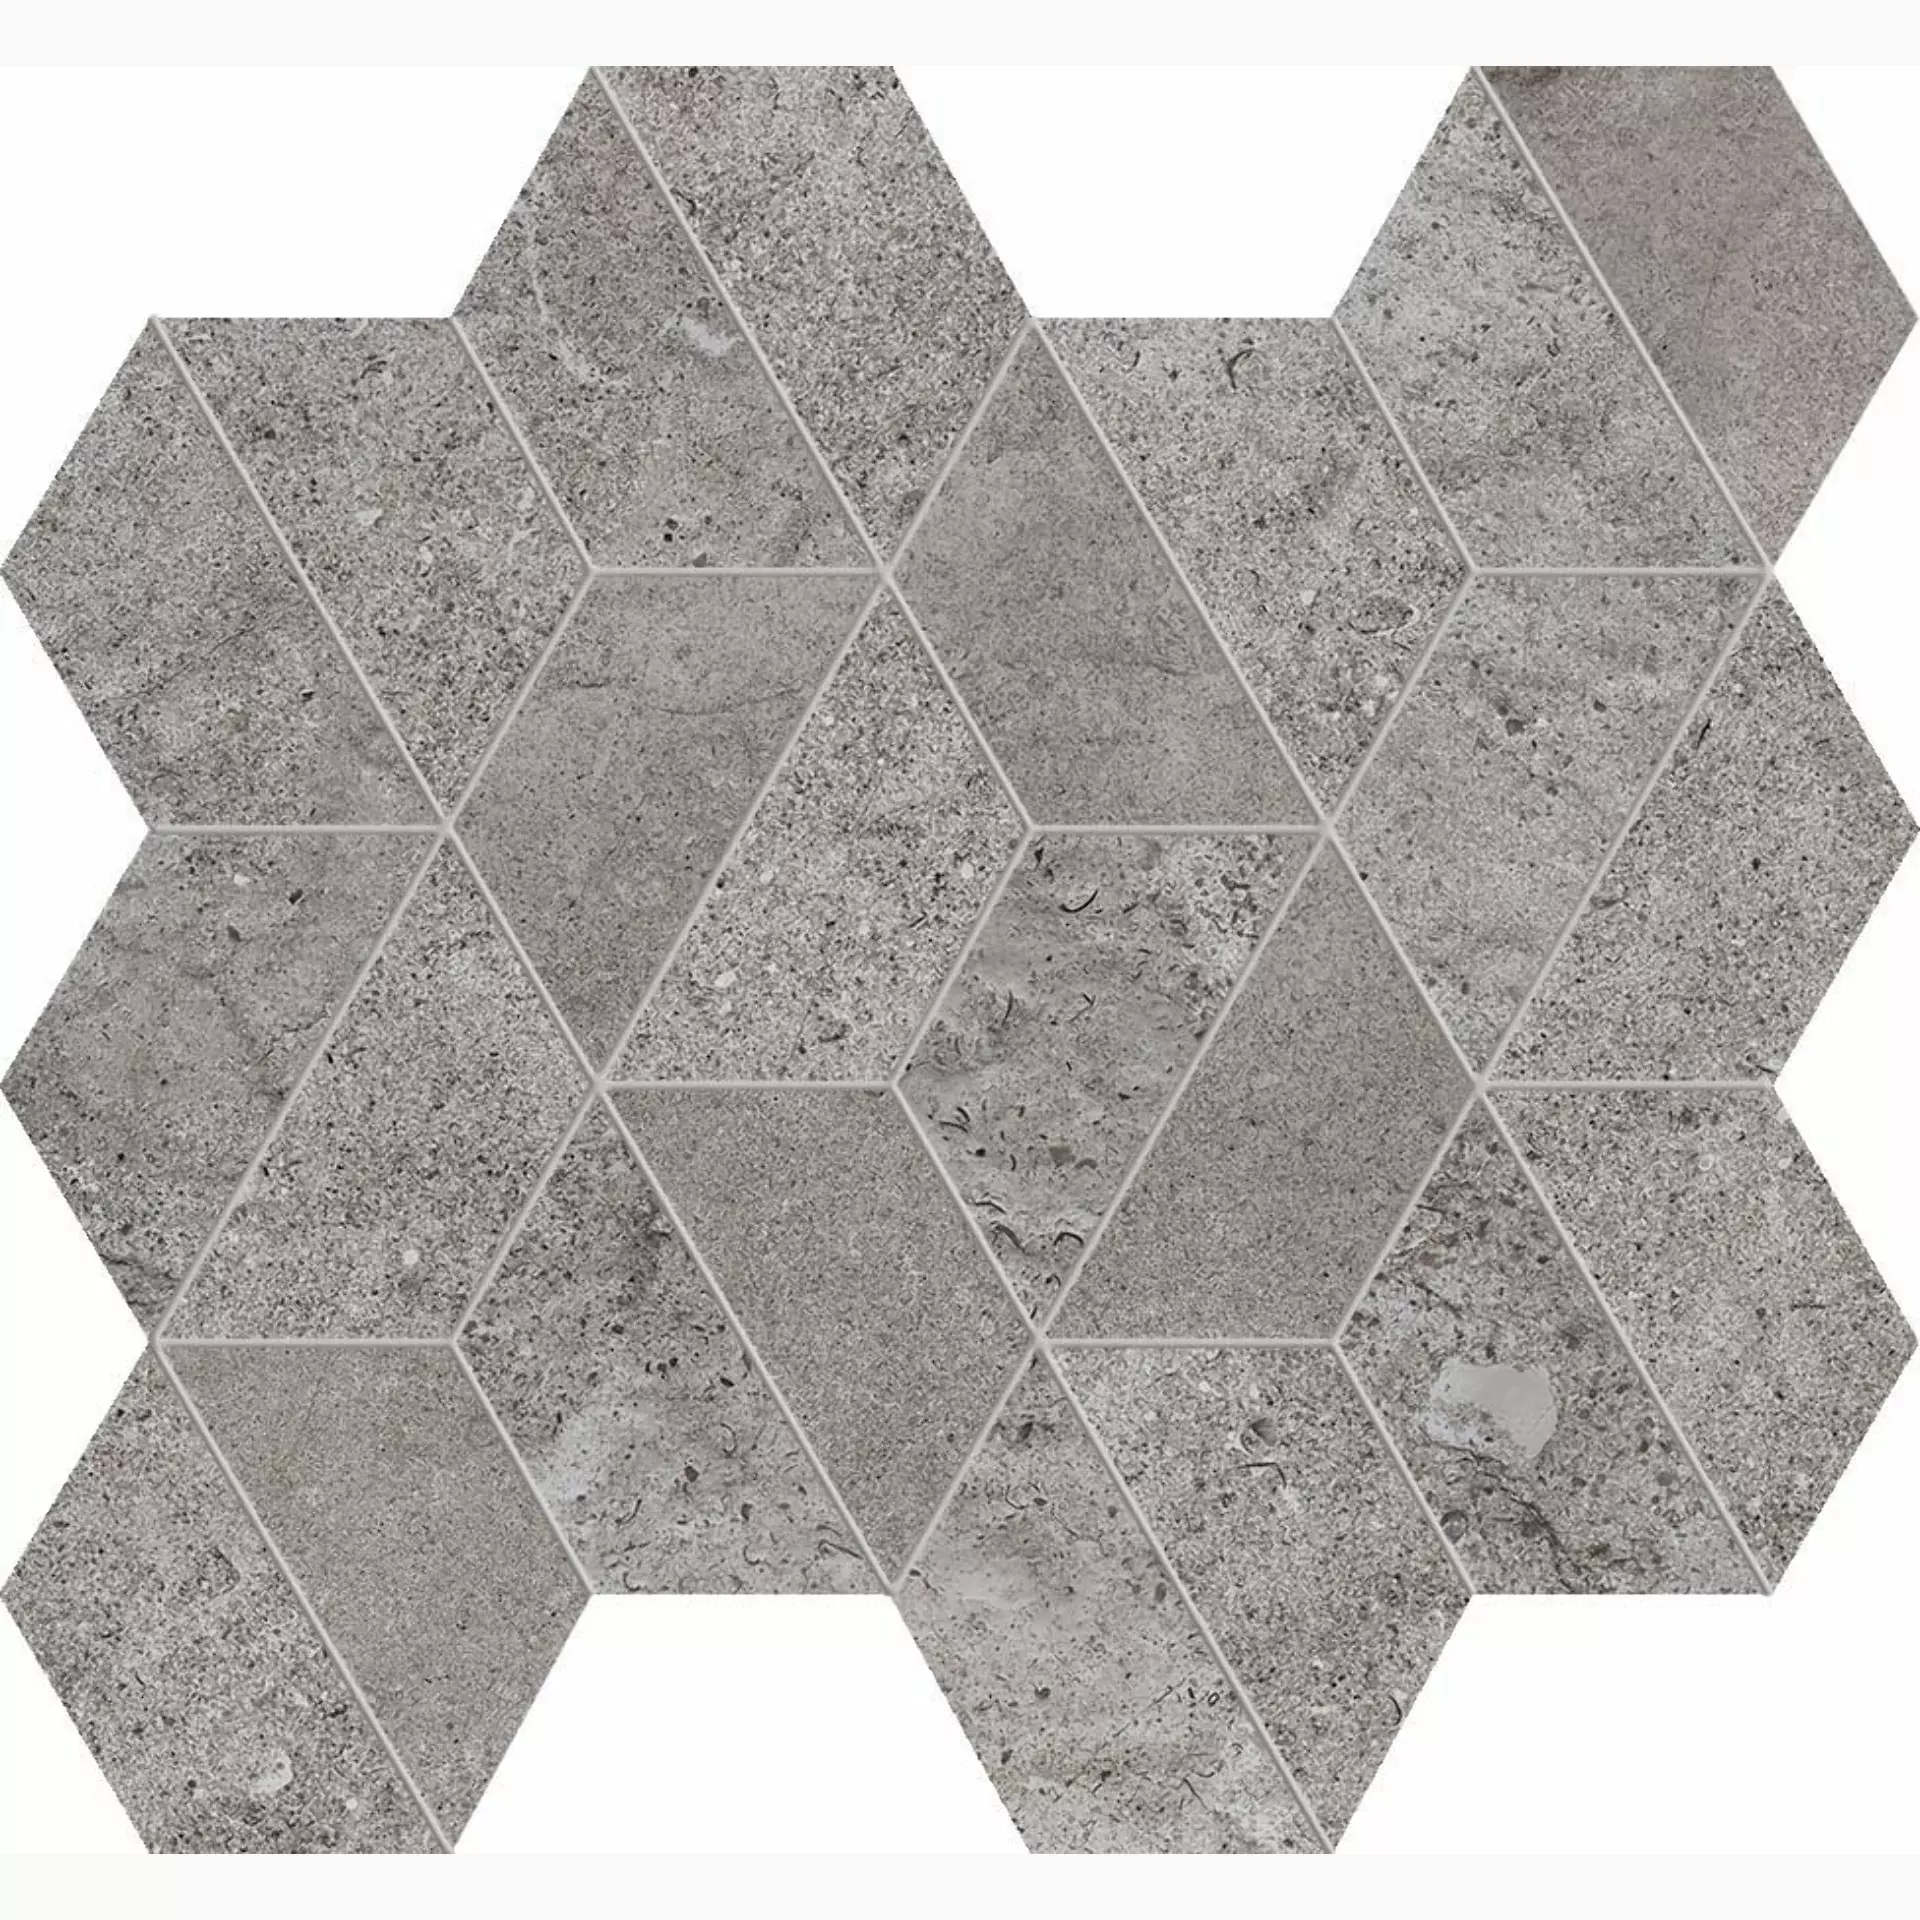 ABK Alpes Wide Lead Naturale Mosaic Enigma PF60000290 30x34cm rectified 8,5mm